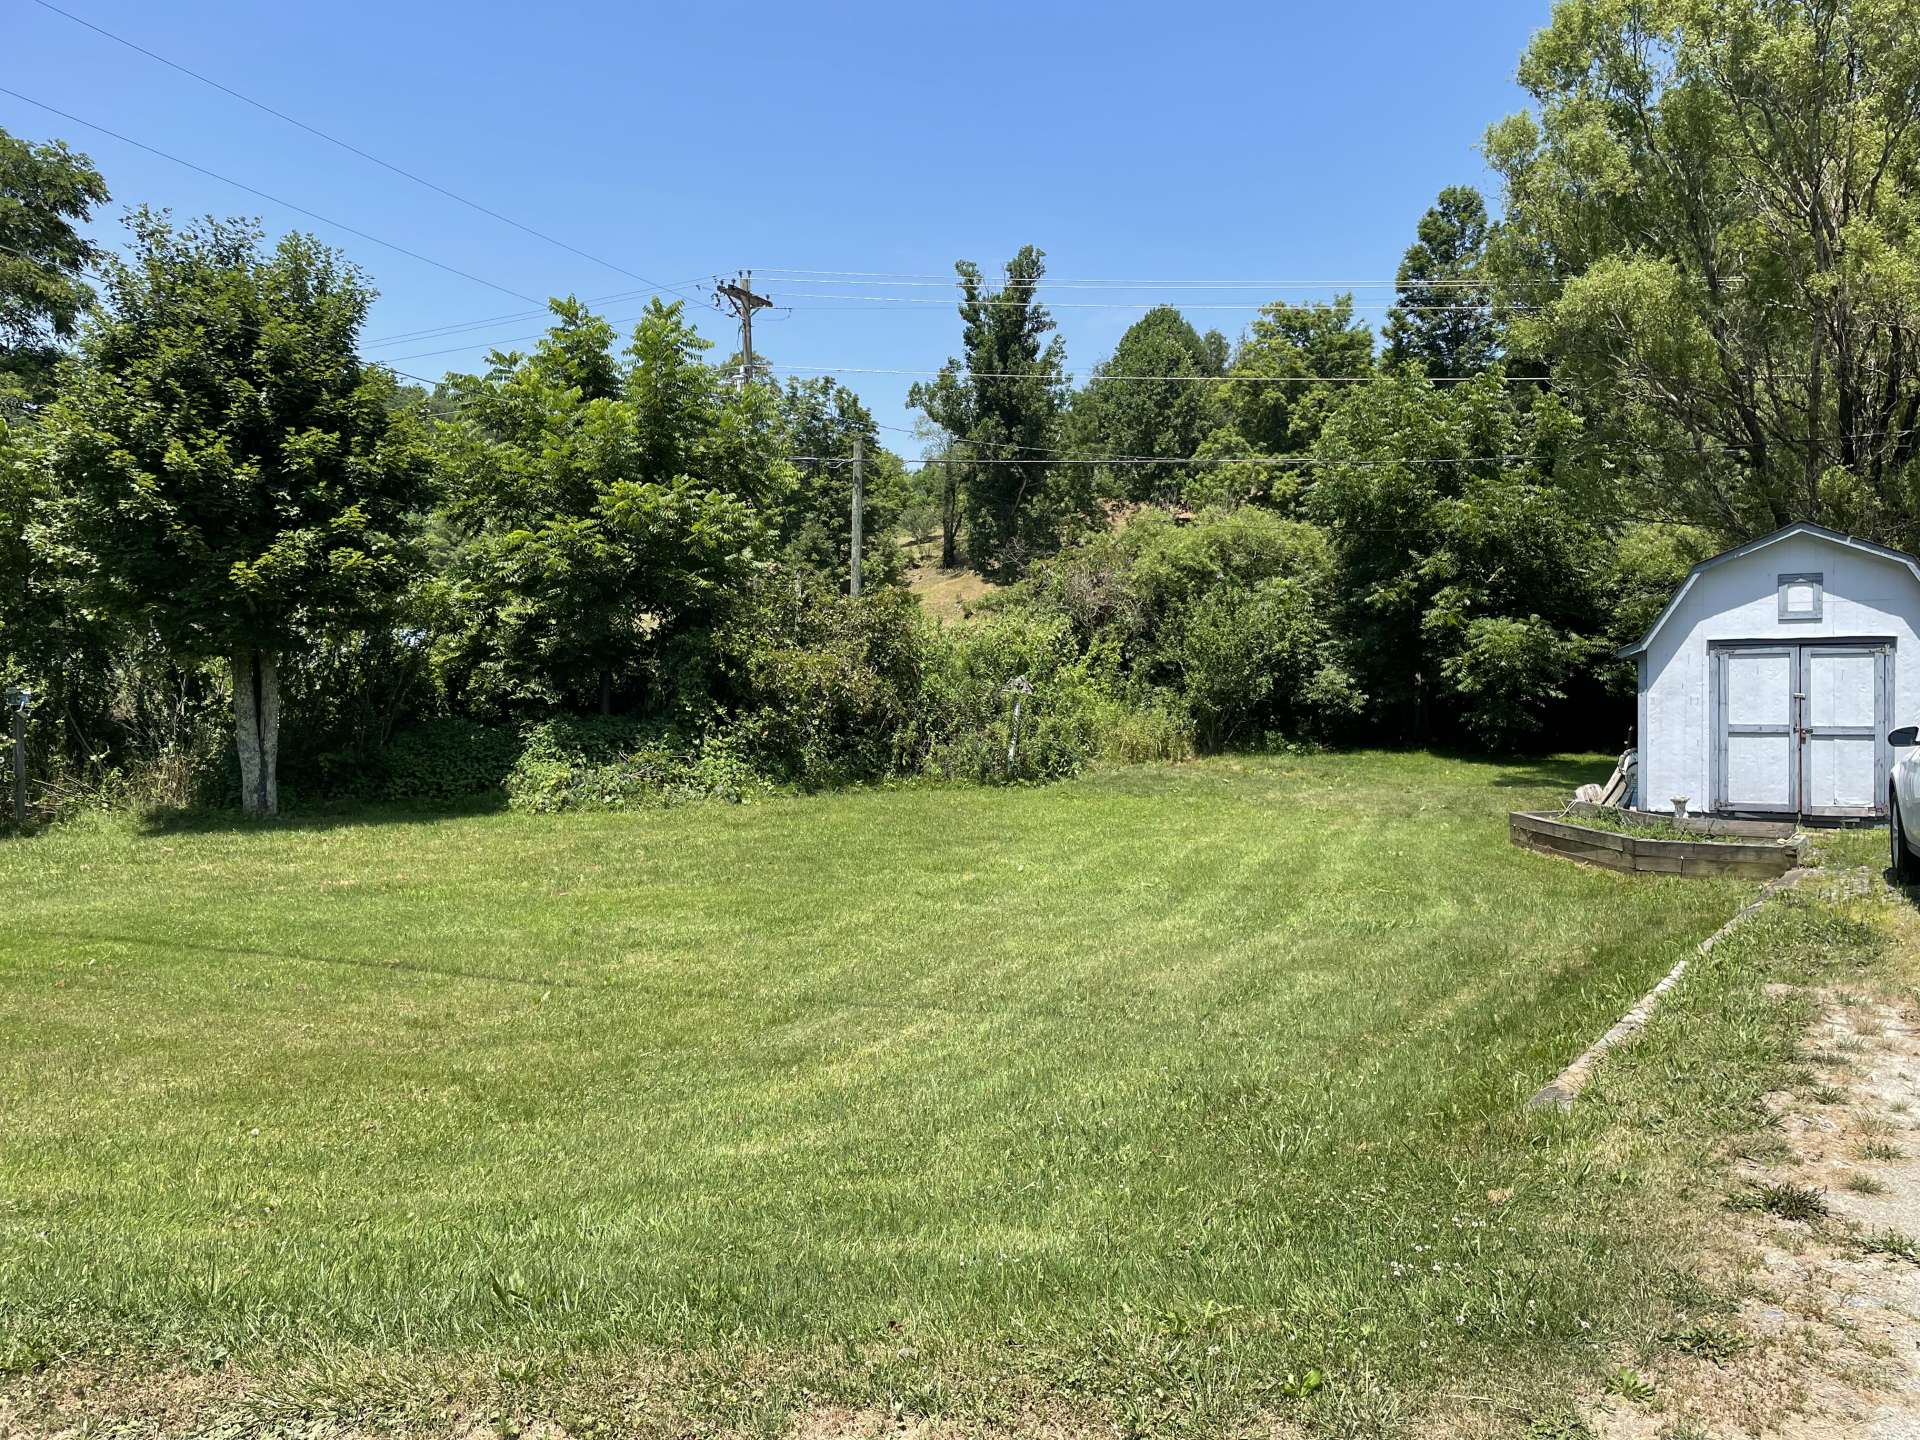 Large yard beside the house.